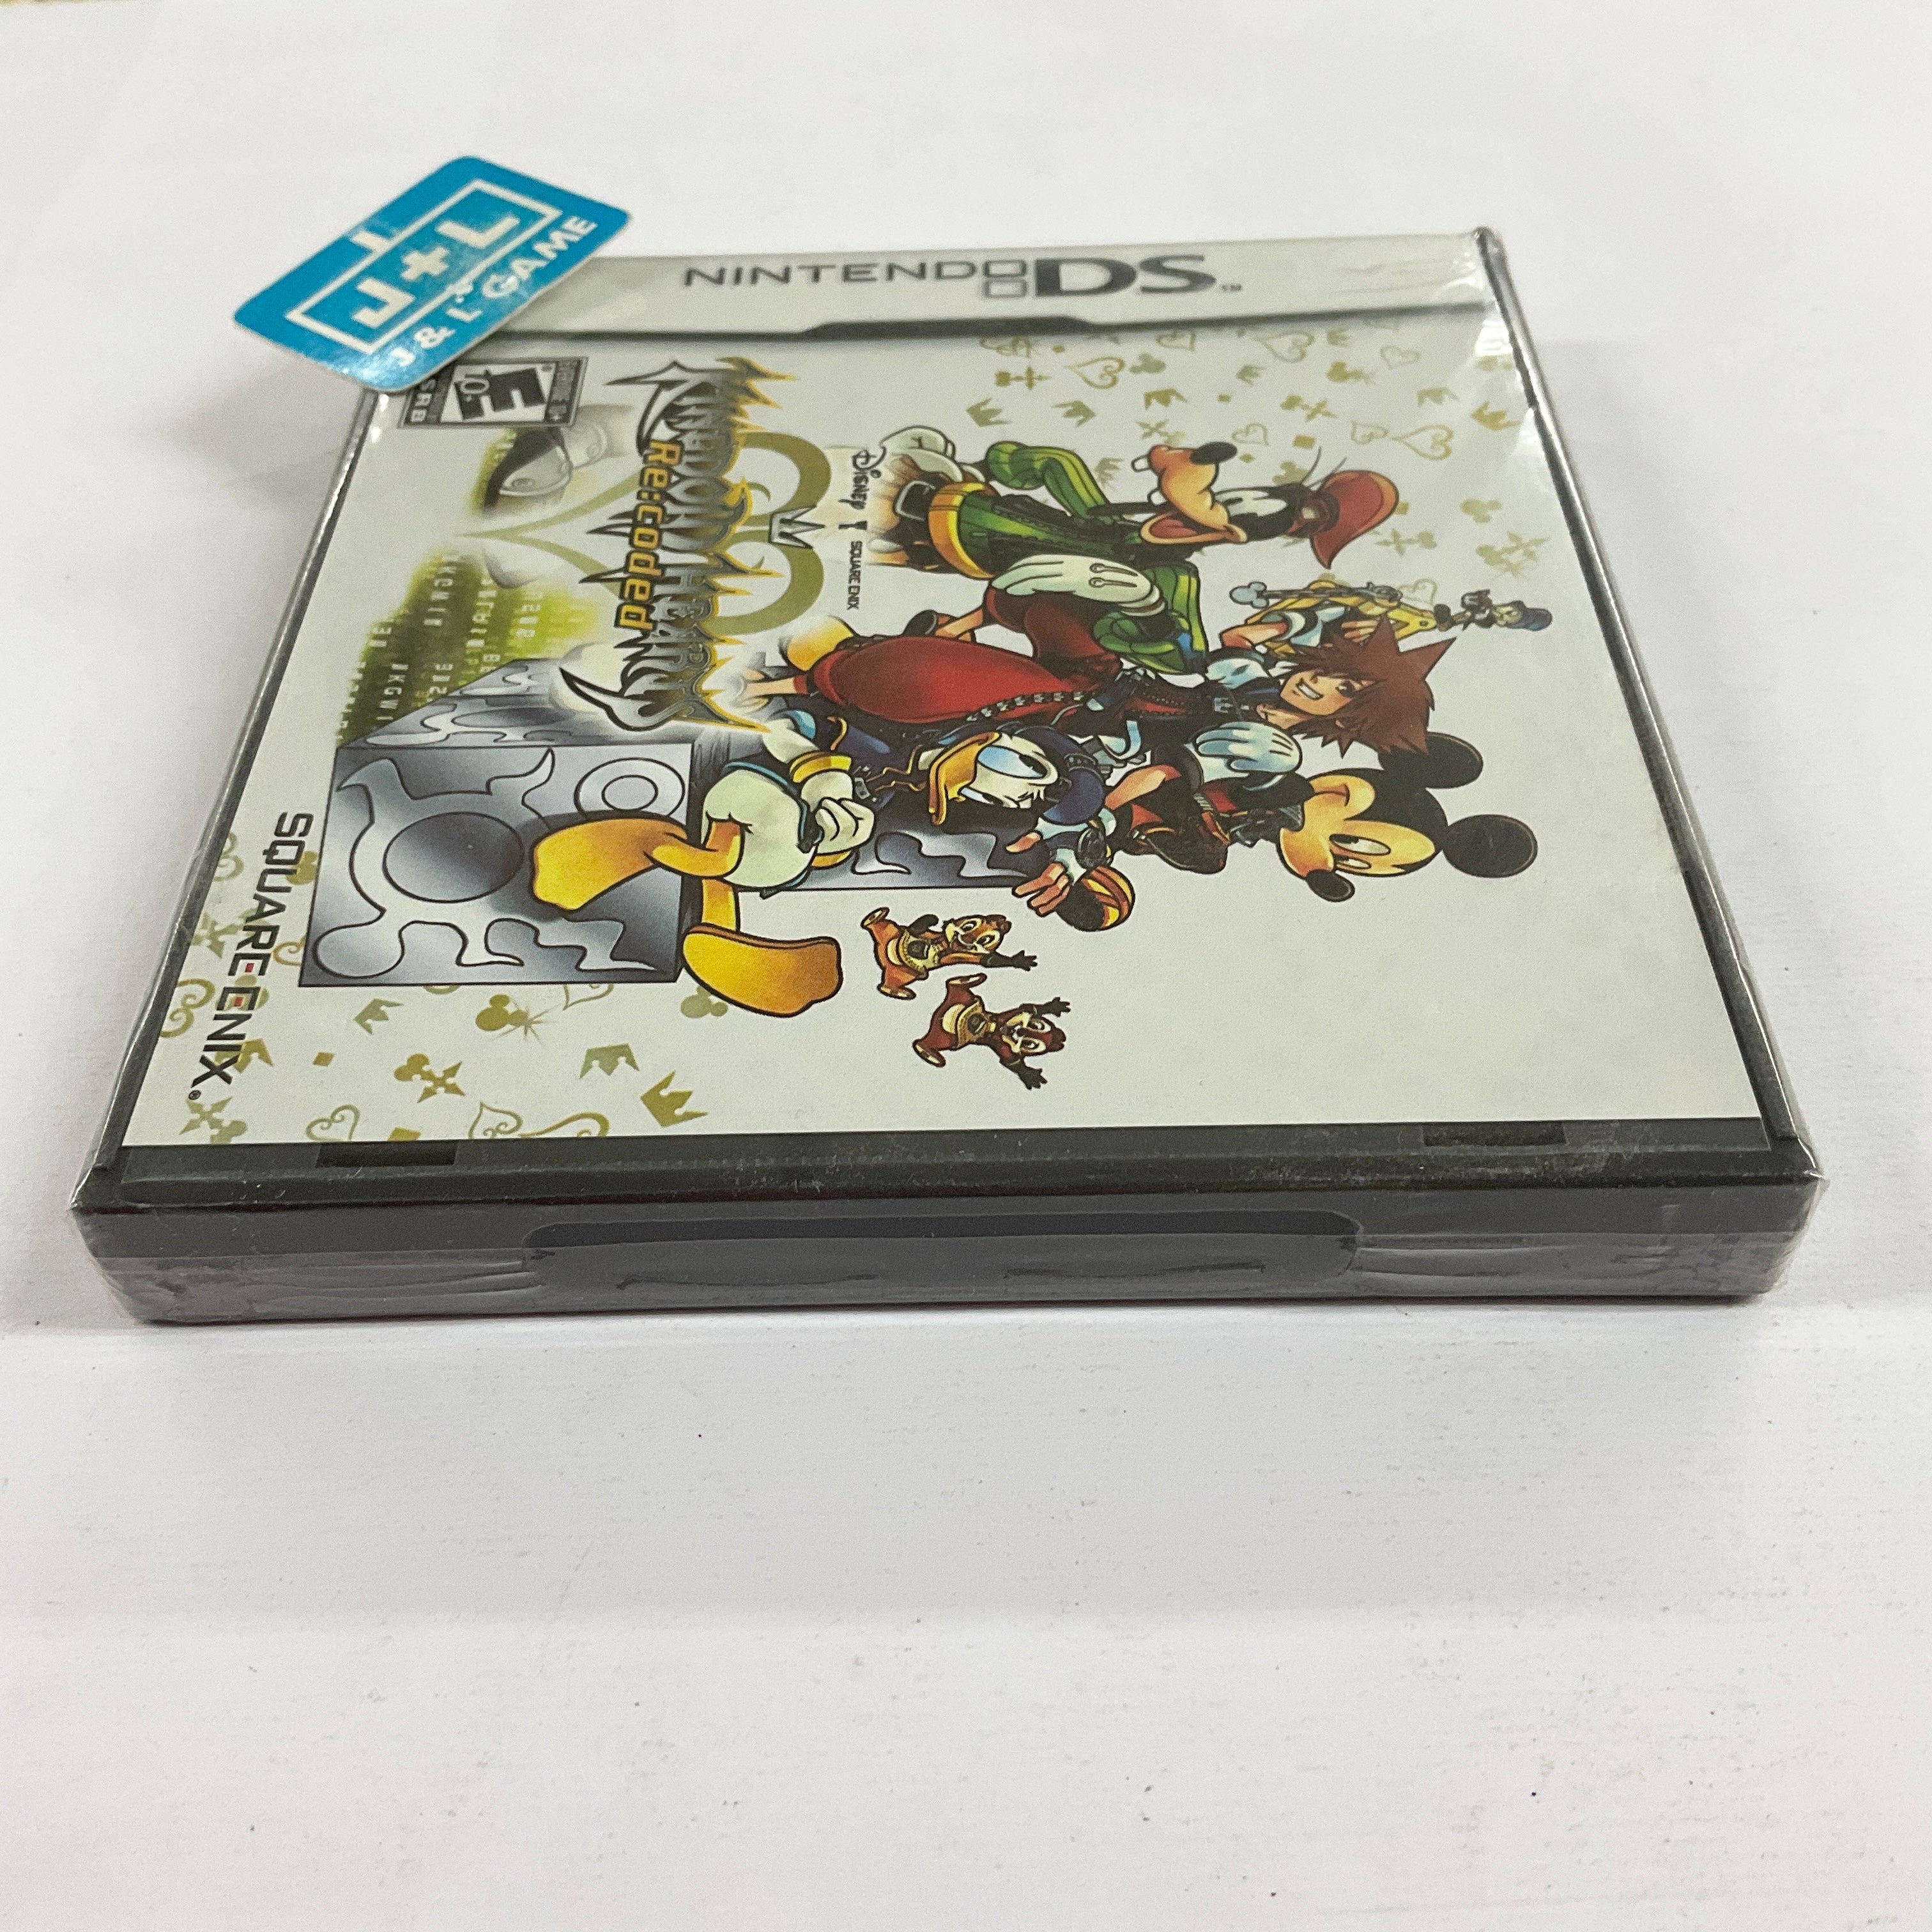 Kingdom Hearts Re:coded - (NDS) Nintendo DS Video Games Square Enix   